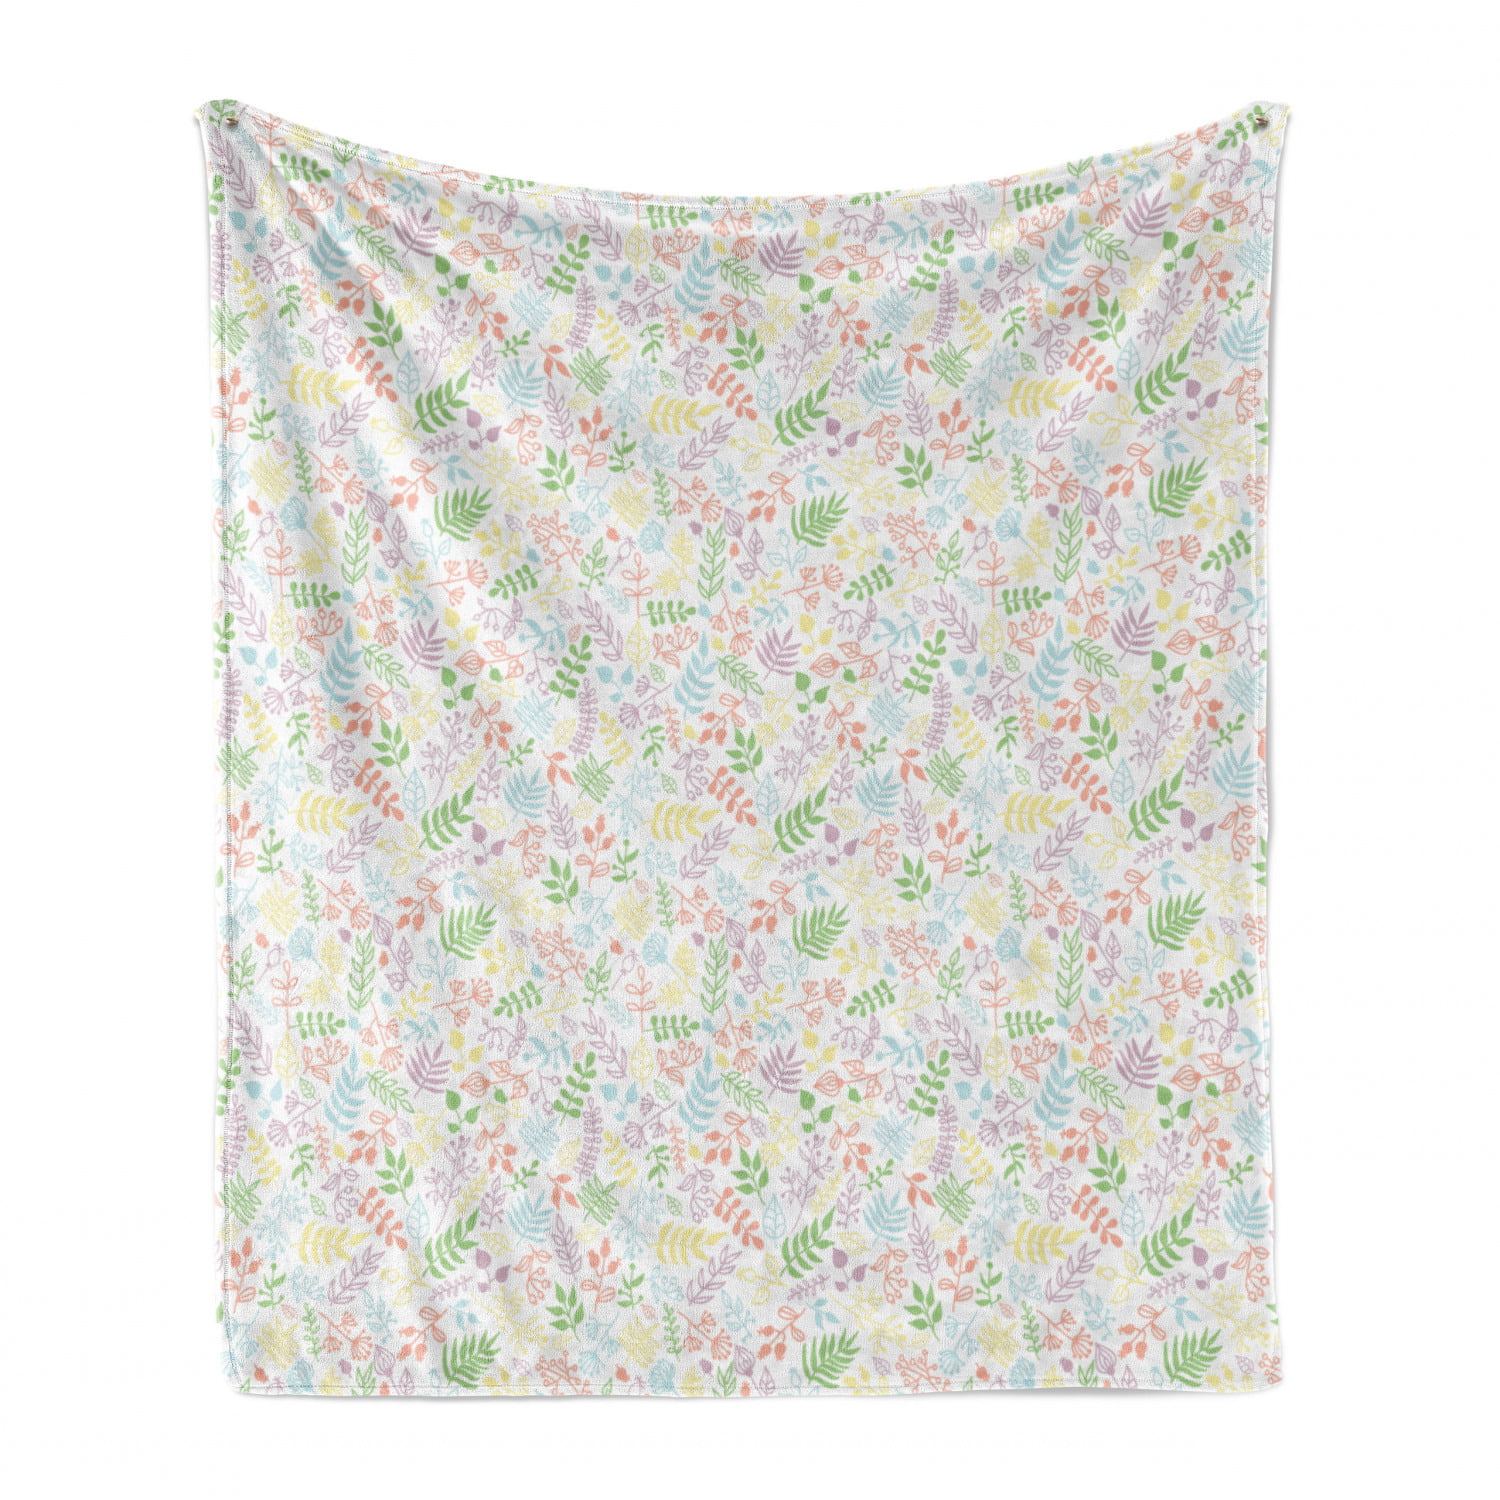 Peonies Peas Roses Bouquet Butterflies Pastel Tones Bridal Theme Pale Pink Green 60 x 80 Ambesonne Shabby Flora Soft Flannel Fleece Throw Blanket Cozy Plush for Indoor and Outdoor Use 